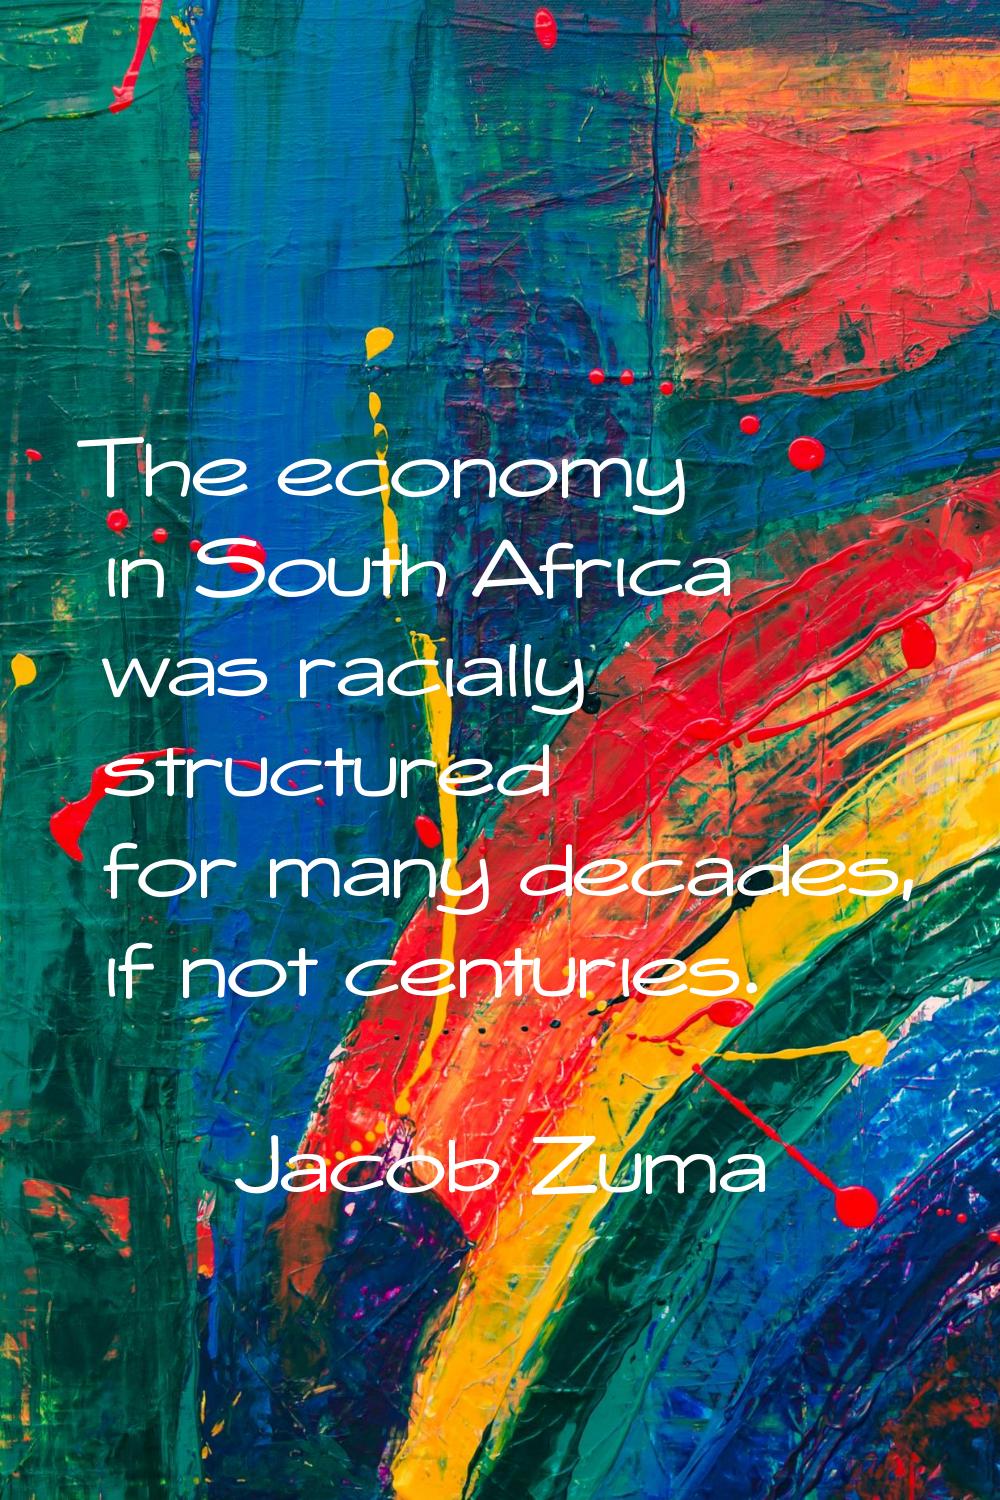 The economy in South Africa was racially structured for many decades, if not centuries.